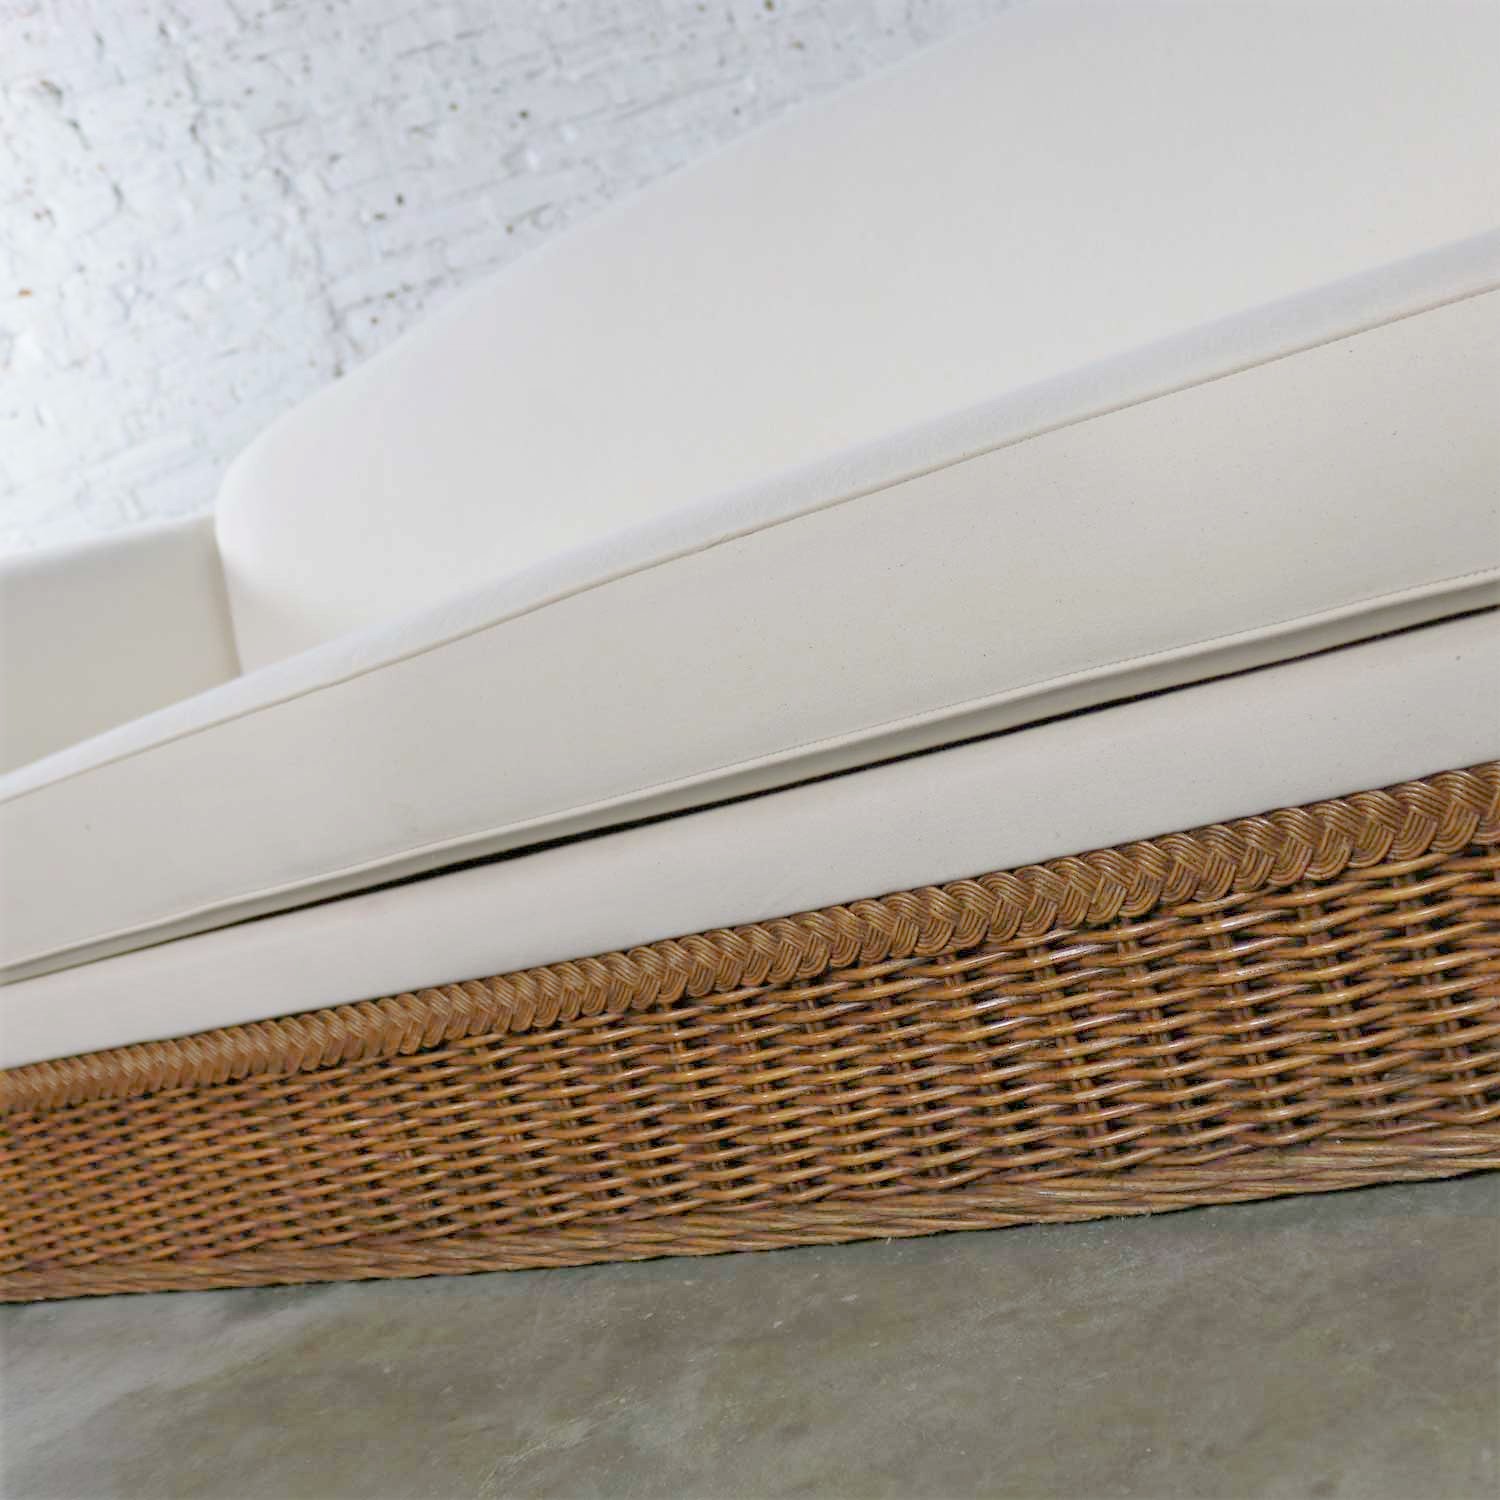 Vintage Modern Wicker Sofa Manner Michael Taylor in New White Canvas